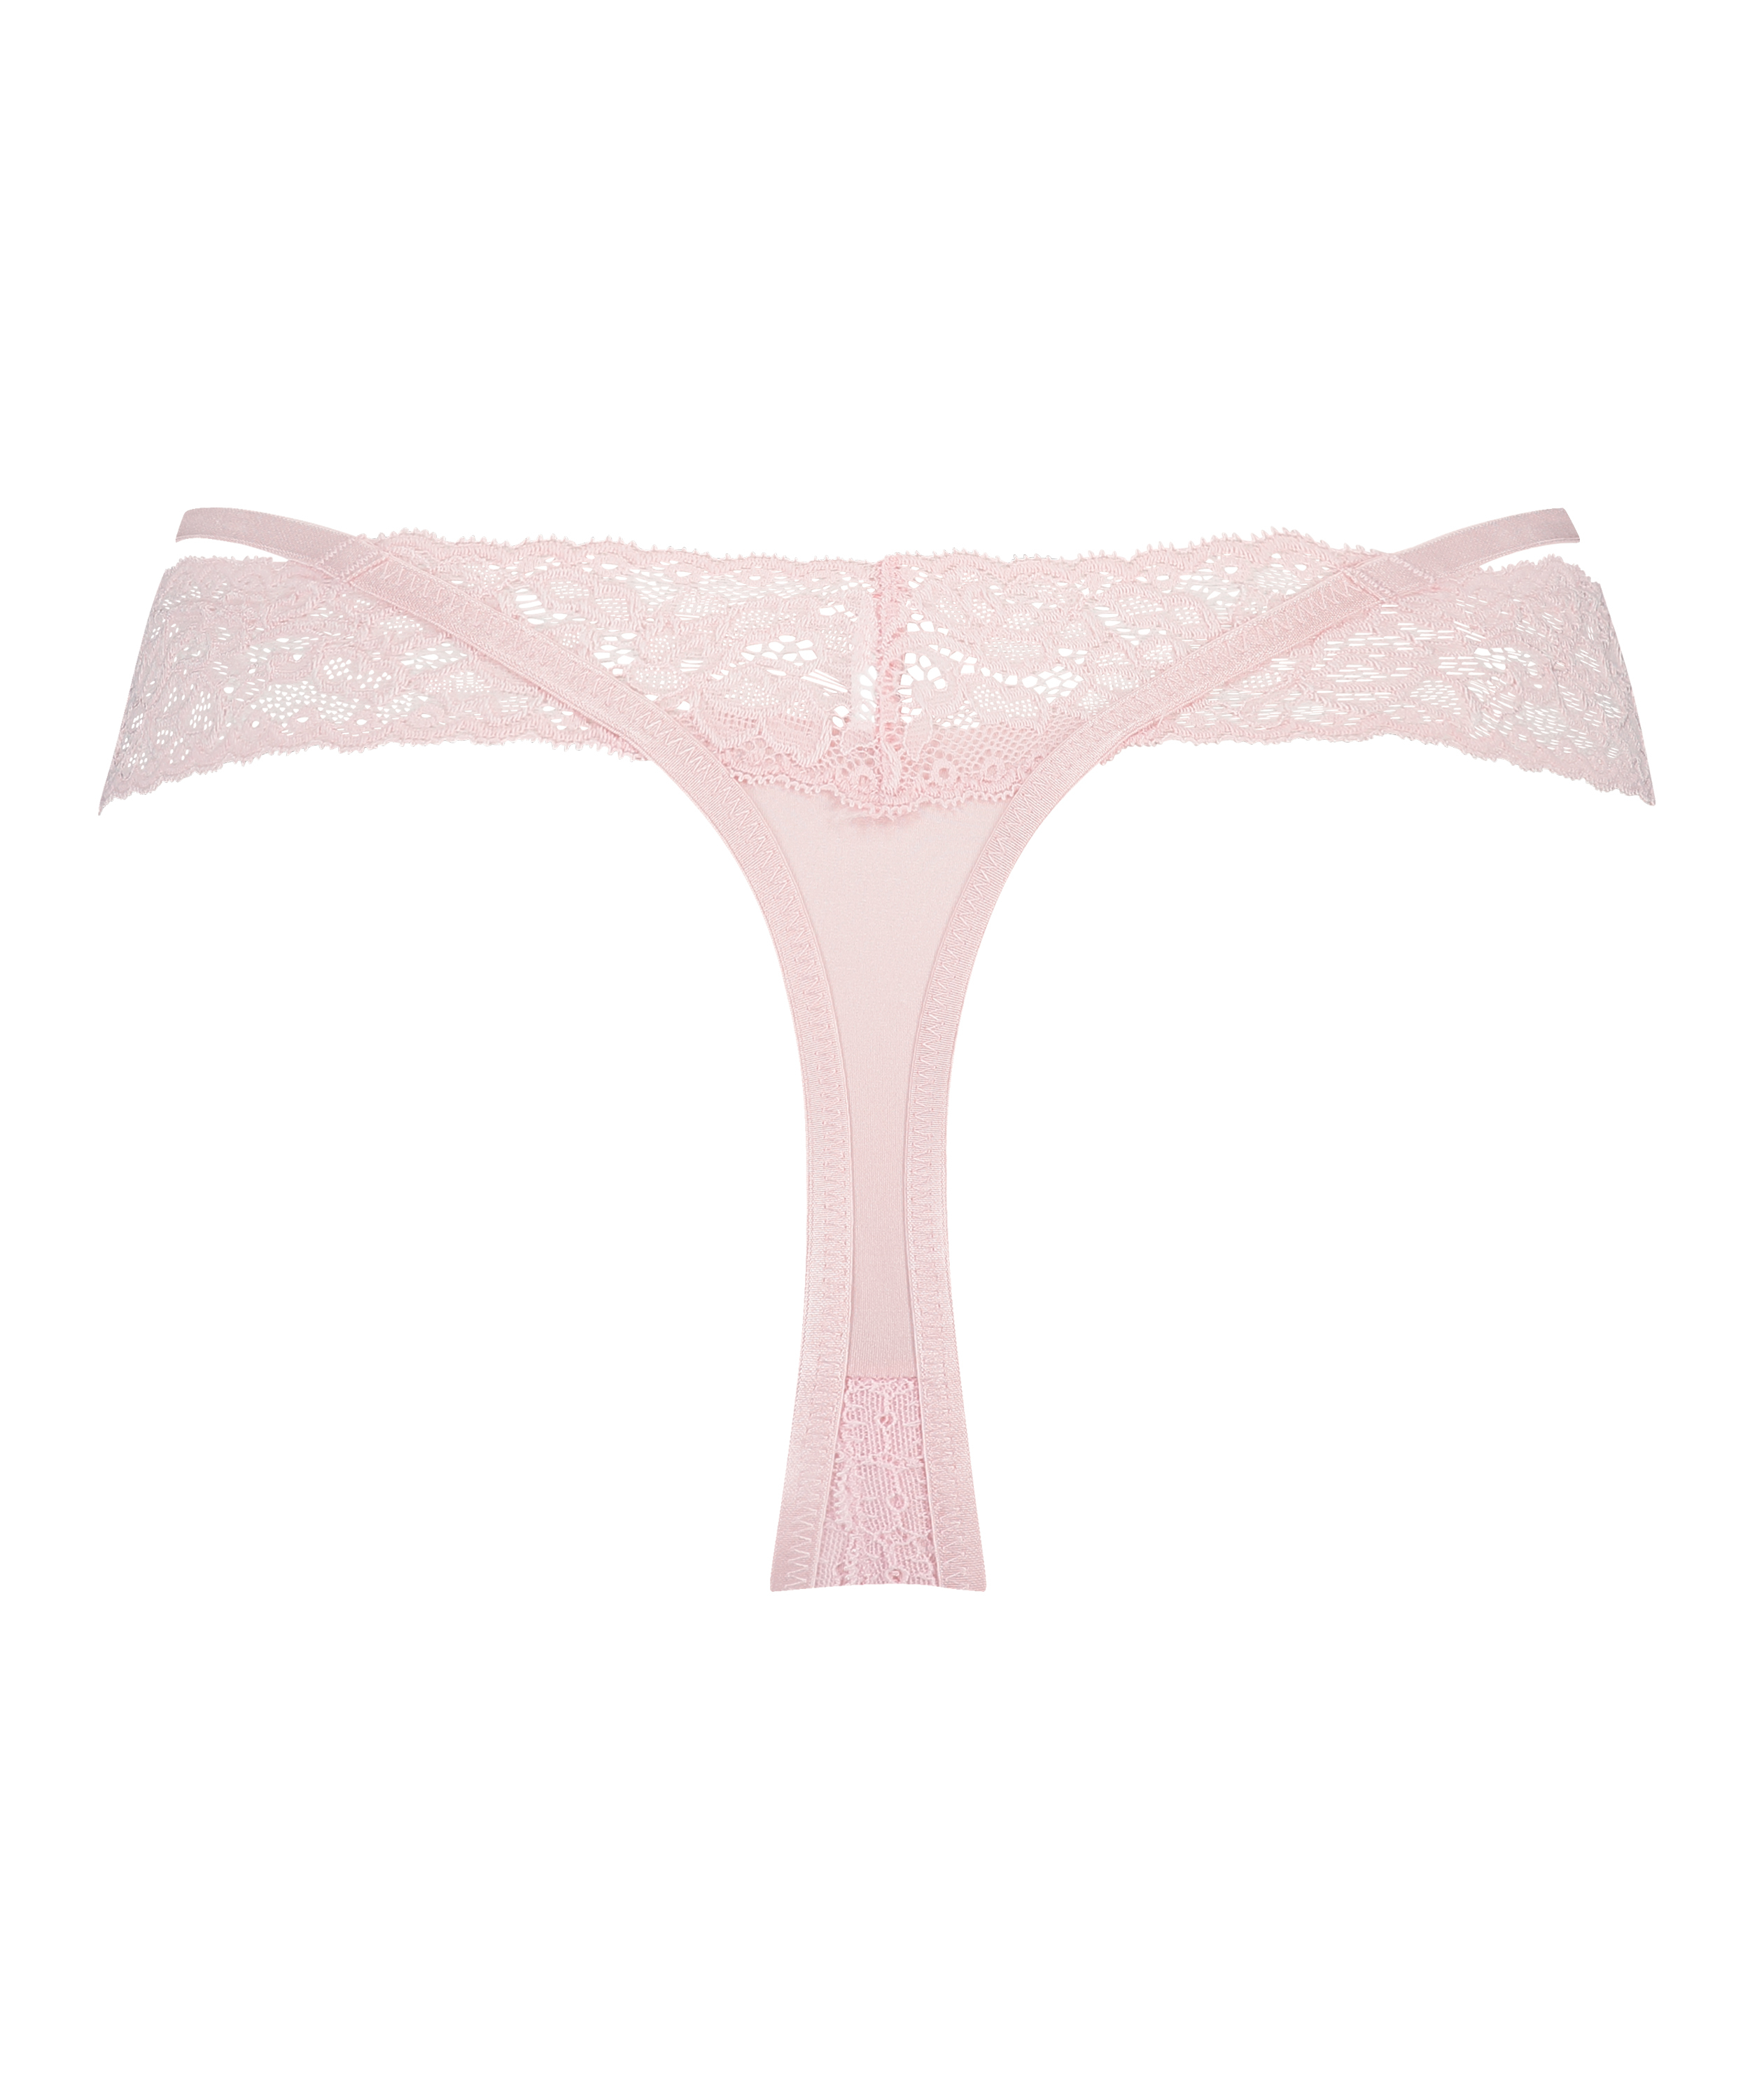 Elliena Extra Low V Thong, Pink, main